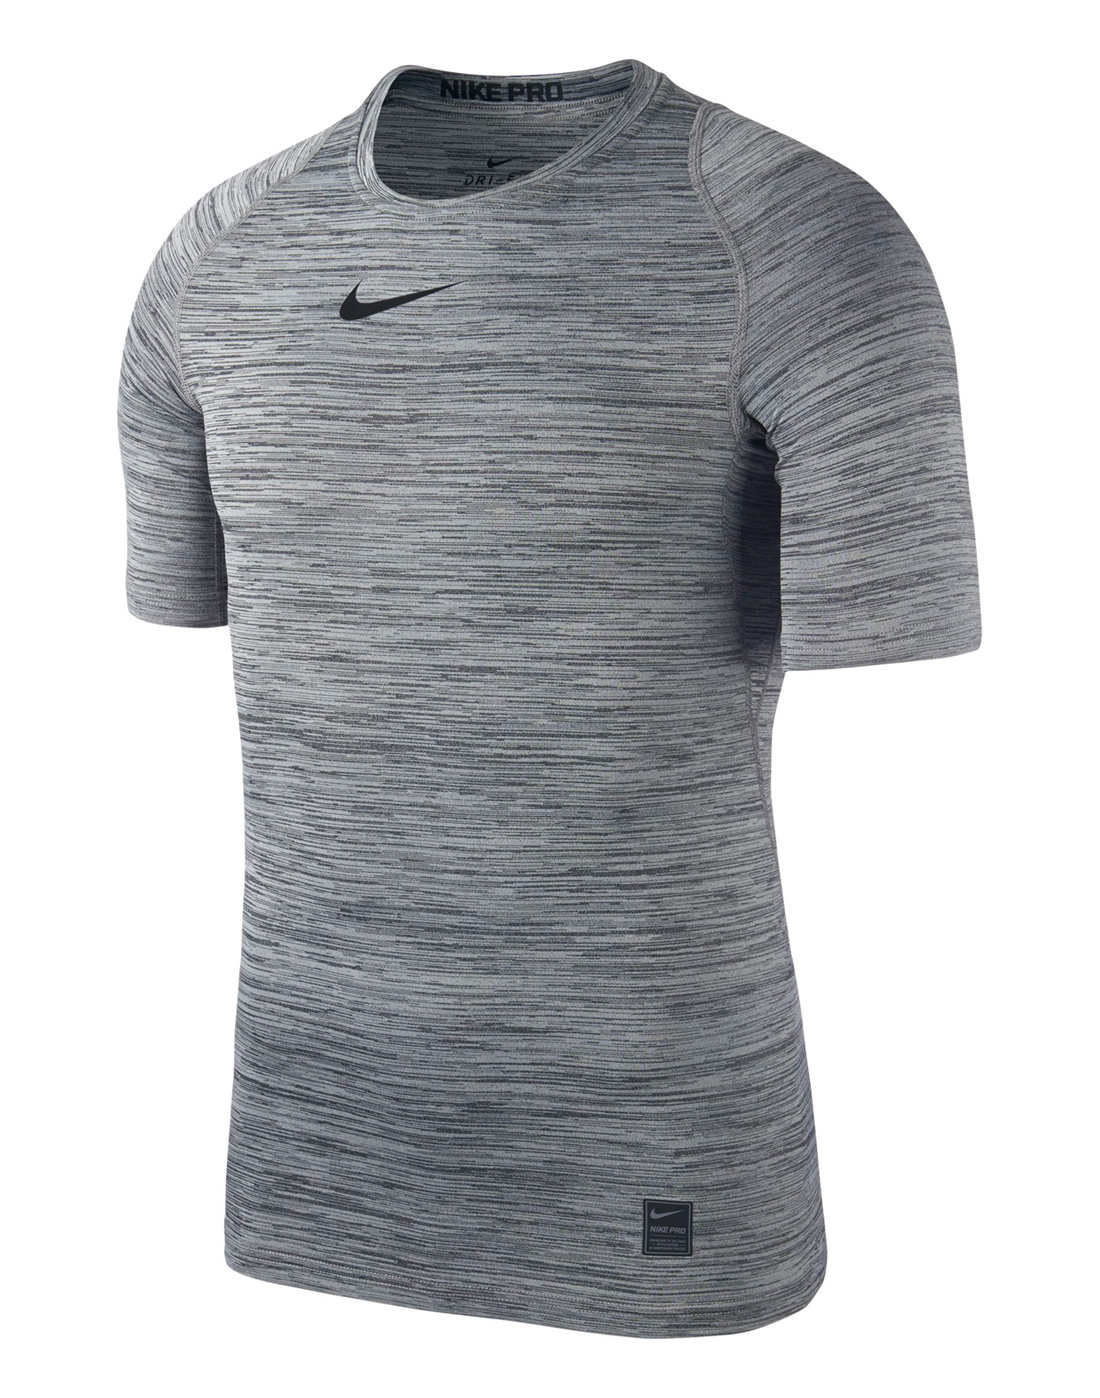 Nike Mens Pro Fitted Tee - Black | Life Style Sports UK